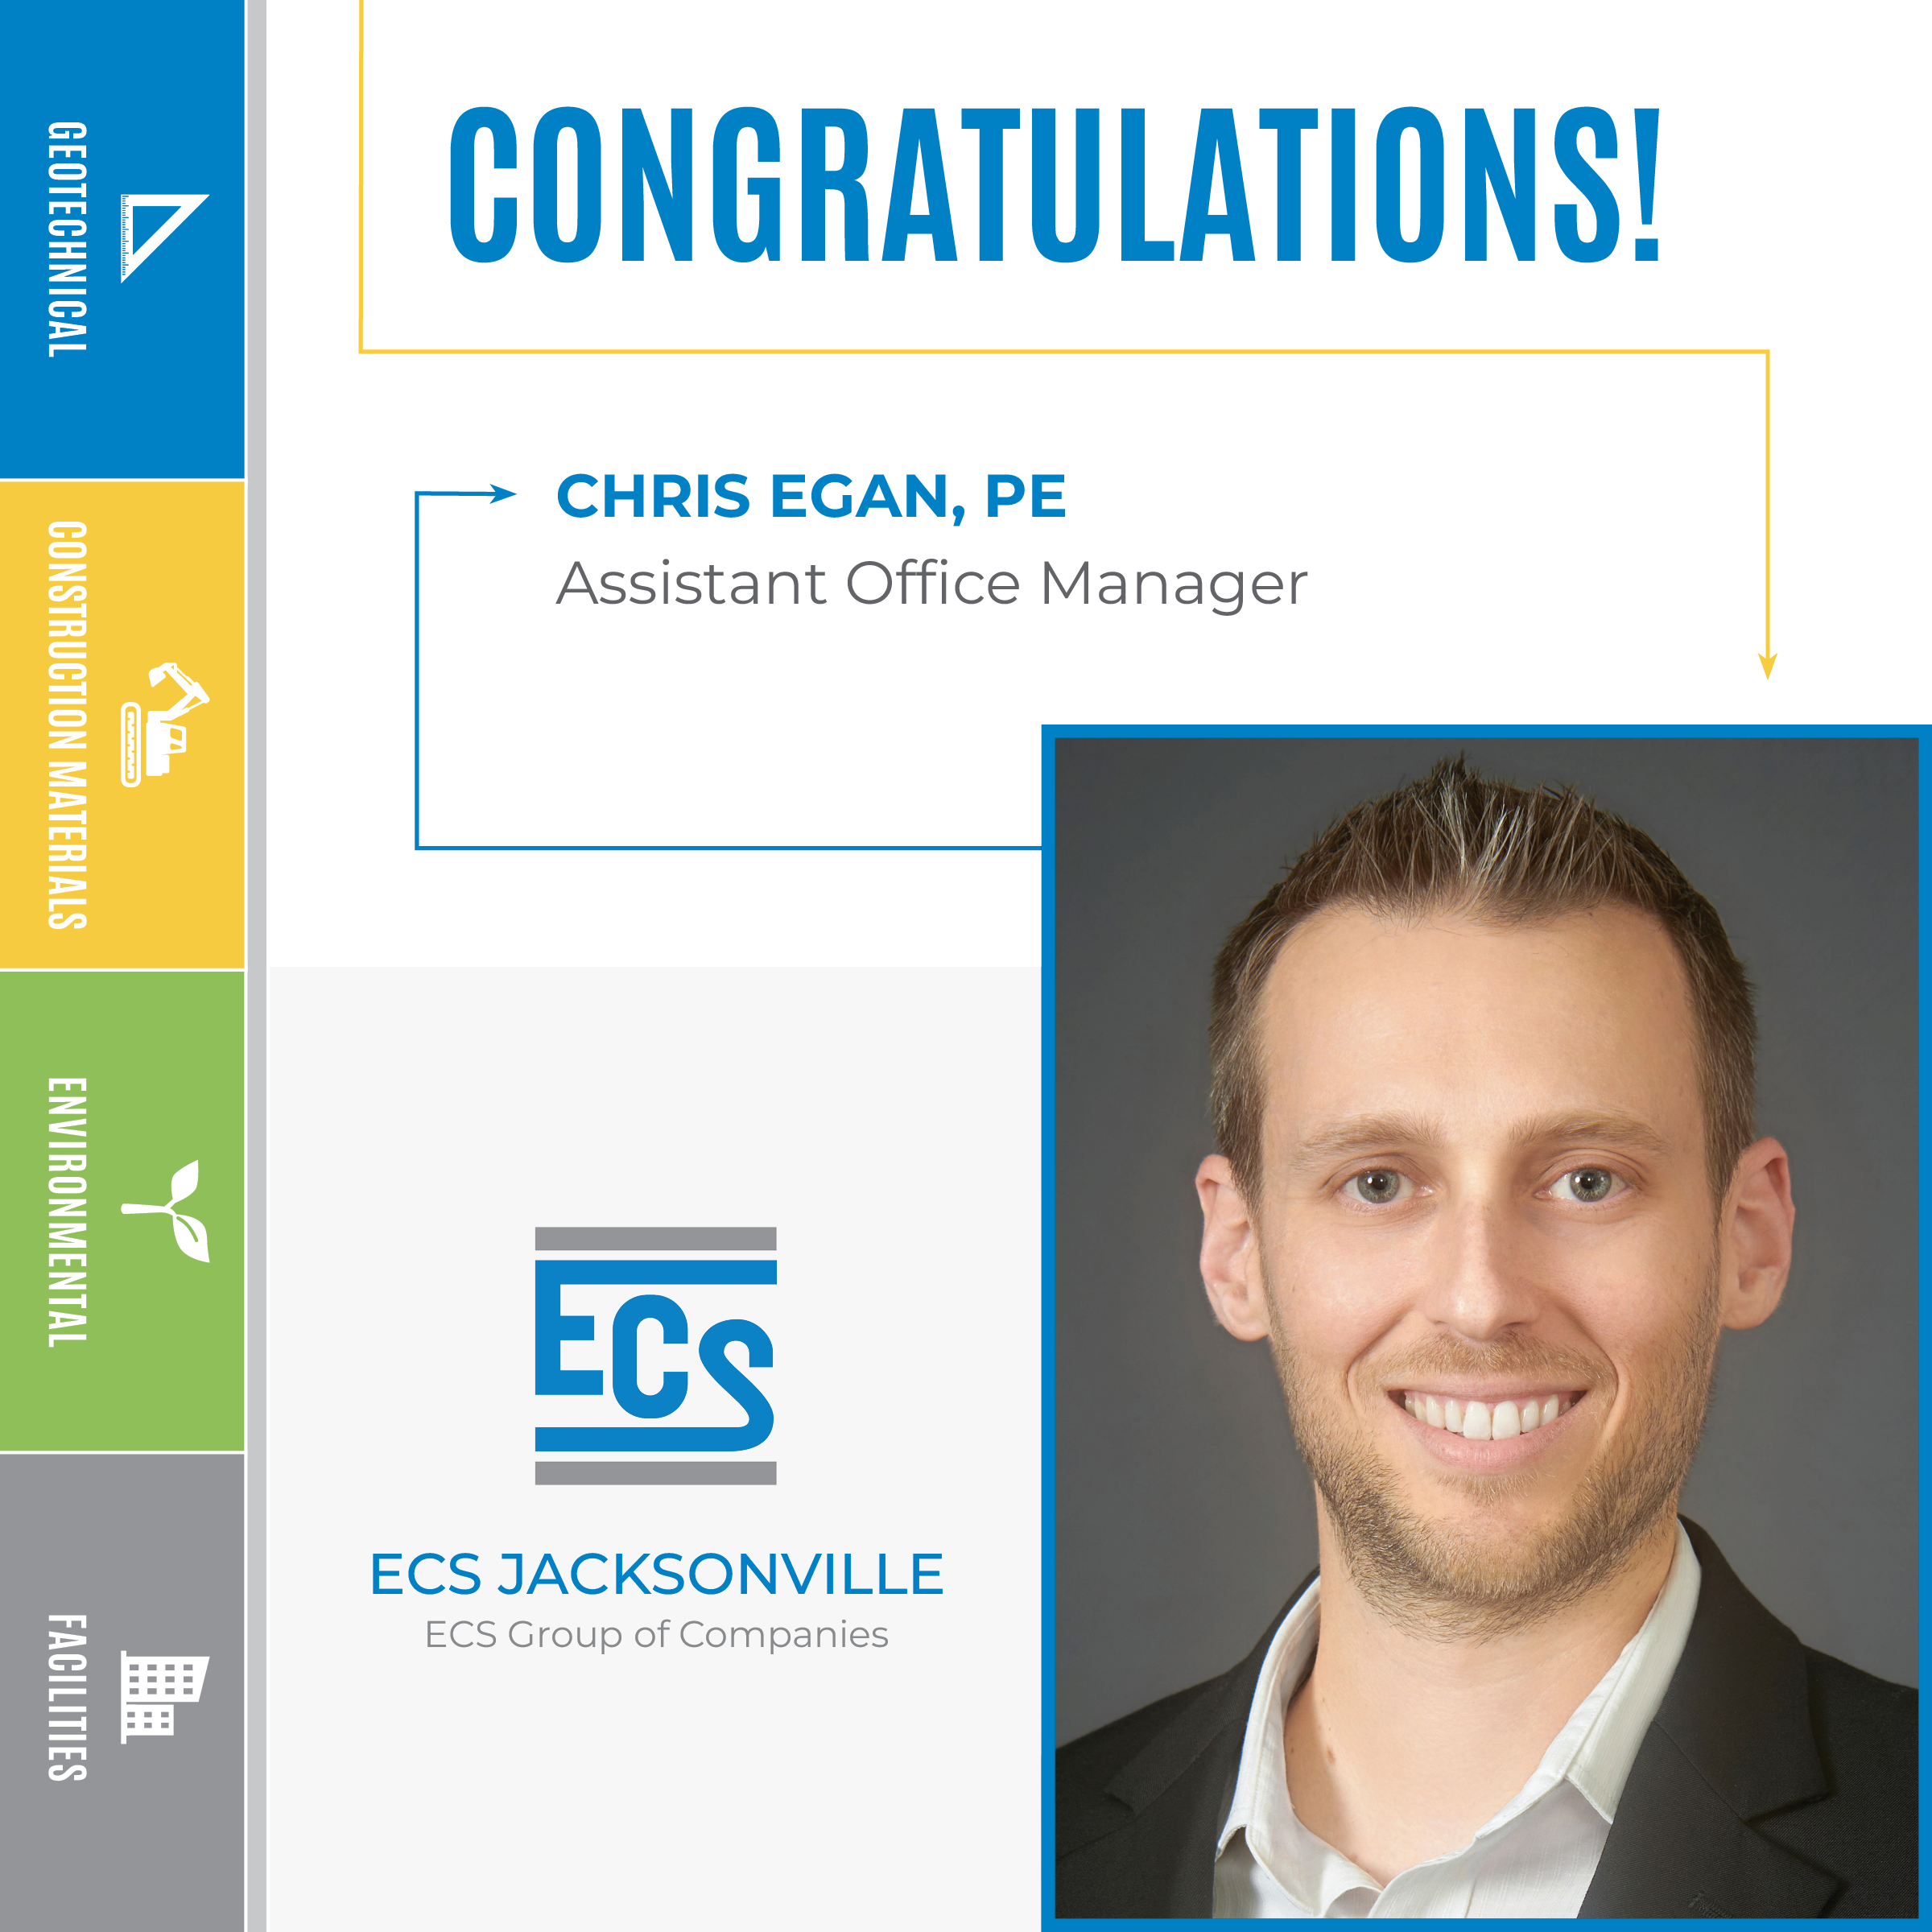 Square graphic with a headshot of Chris Egan in the lower right corner and ECS logo with Chris' new title.